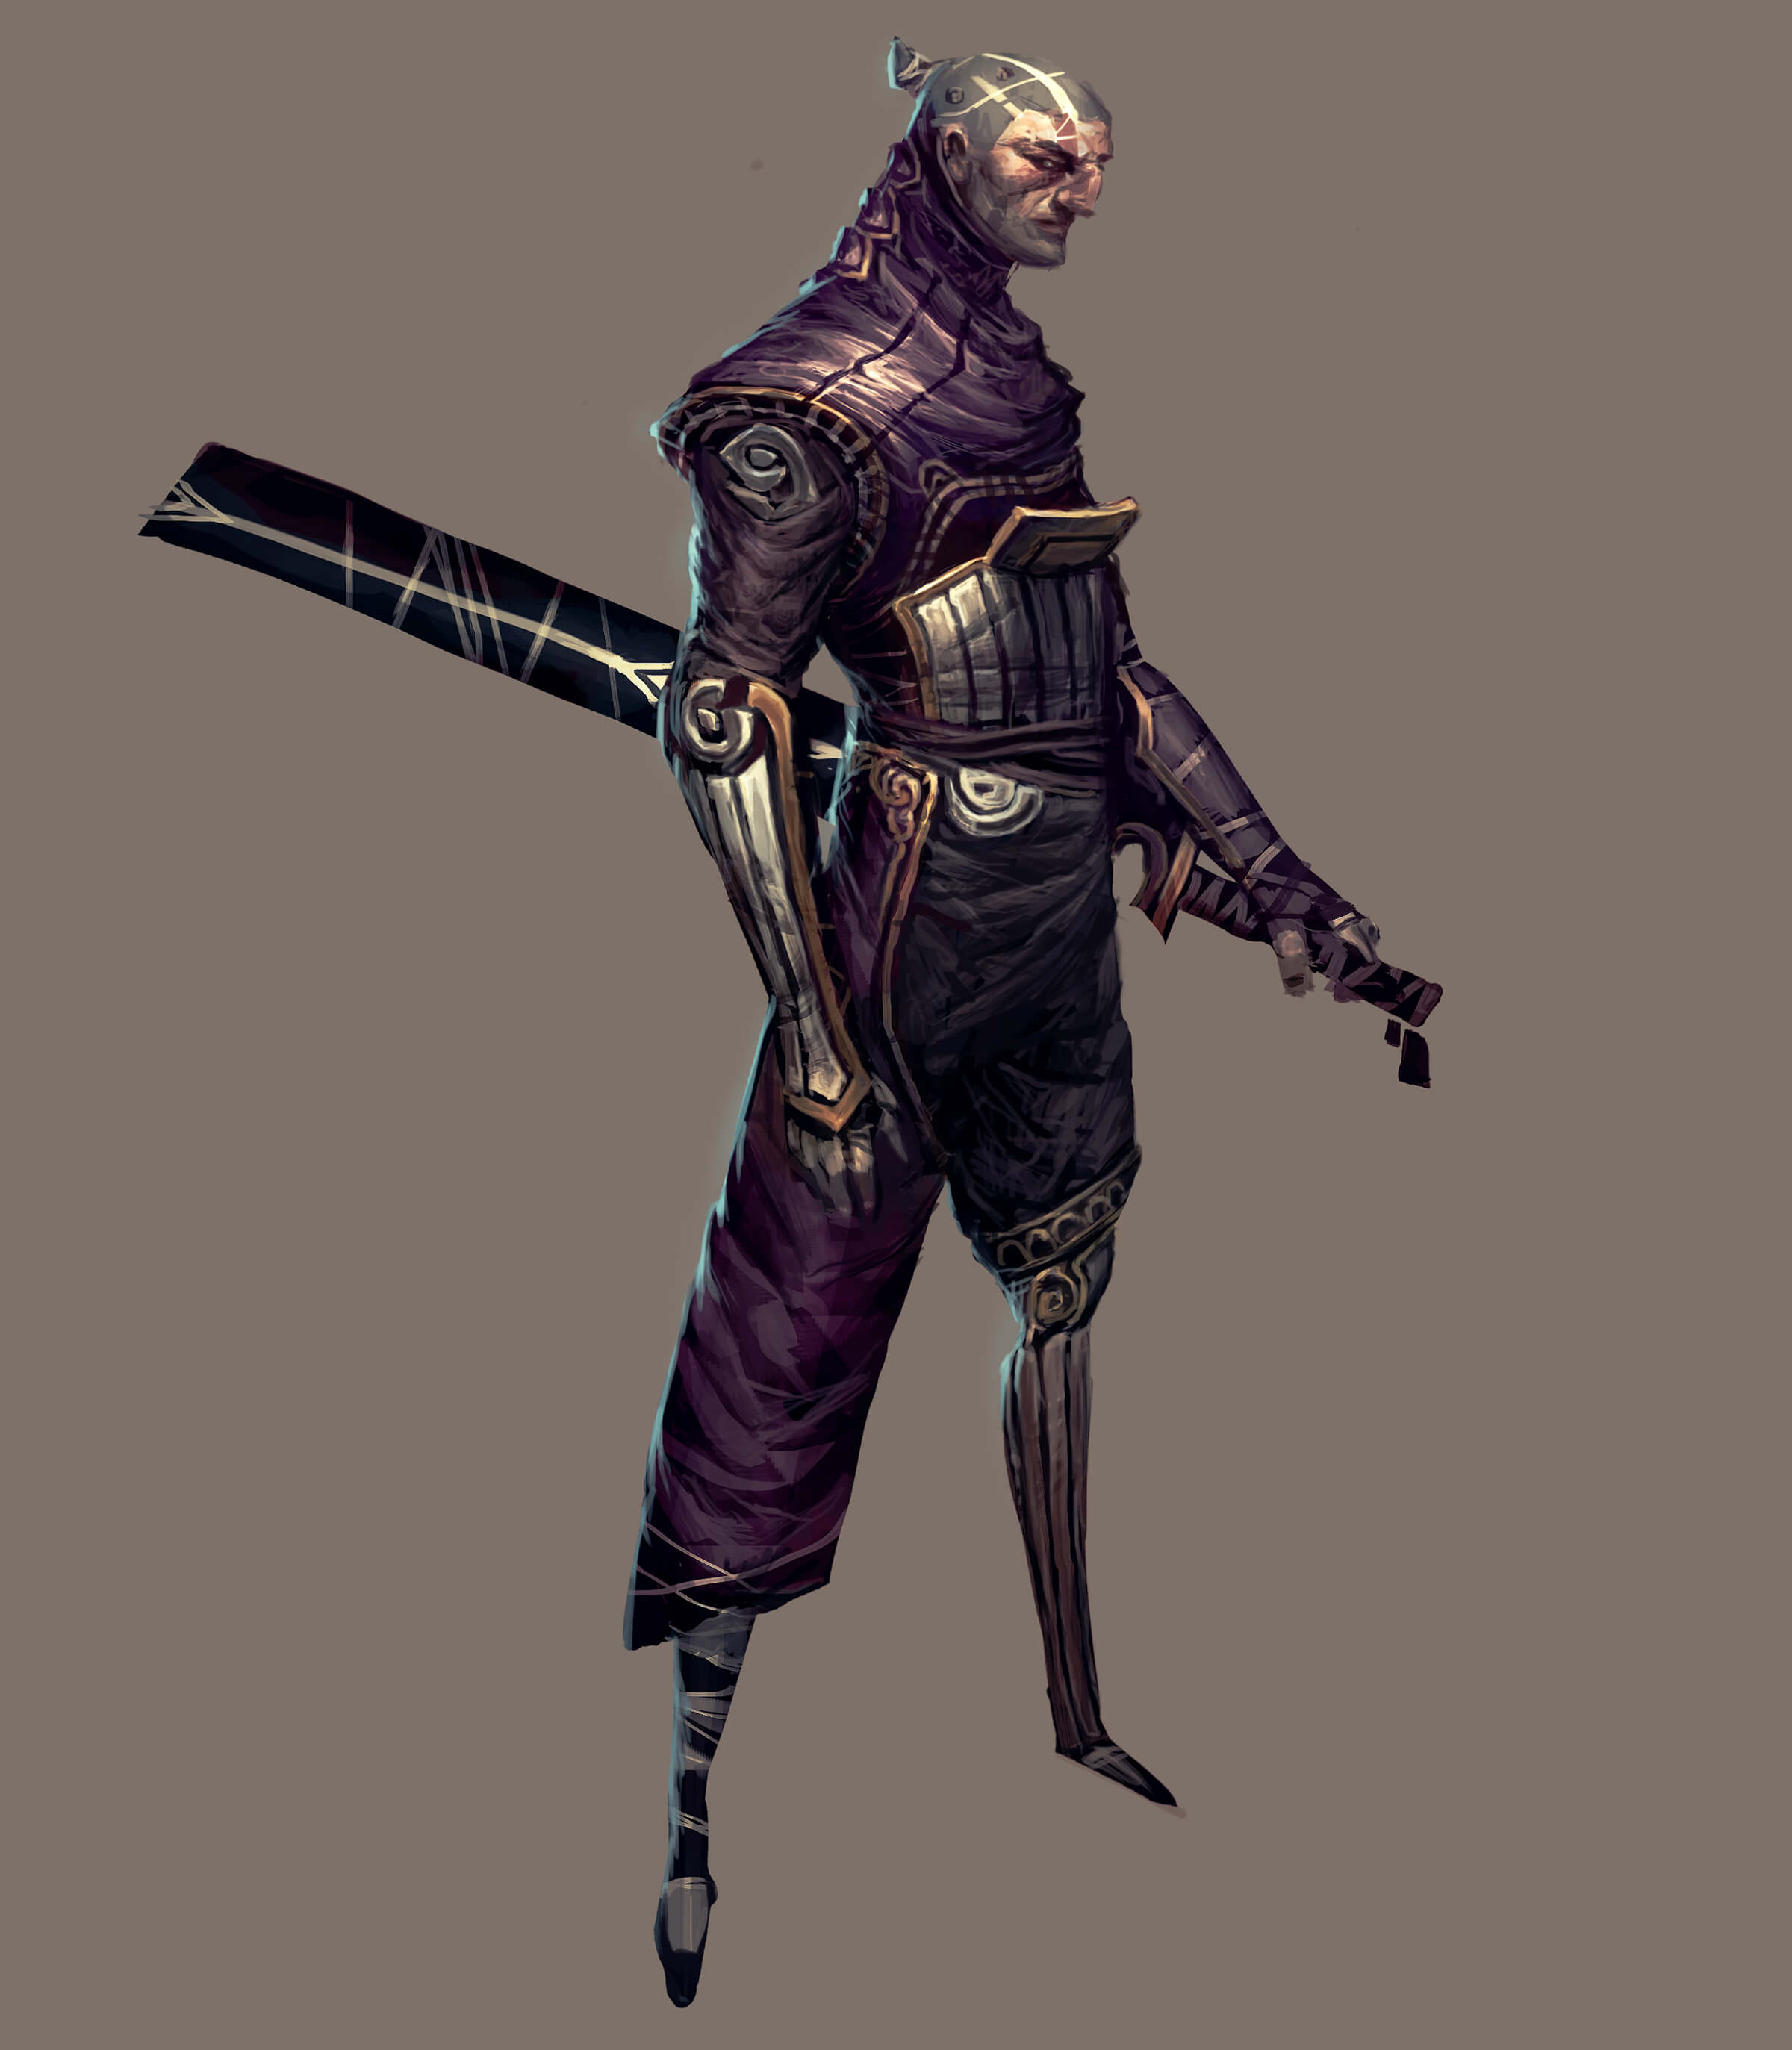 A stern warrior in an ornate, purple and silver uniform seen from the side with a sheathed sword at his hip.